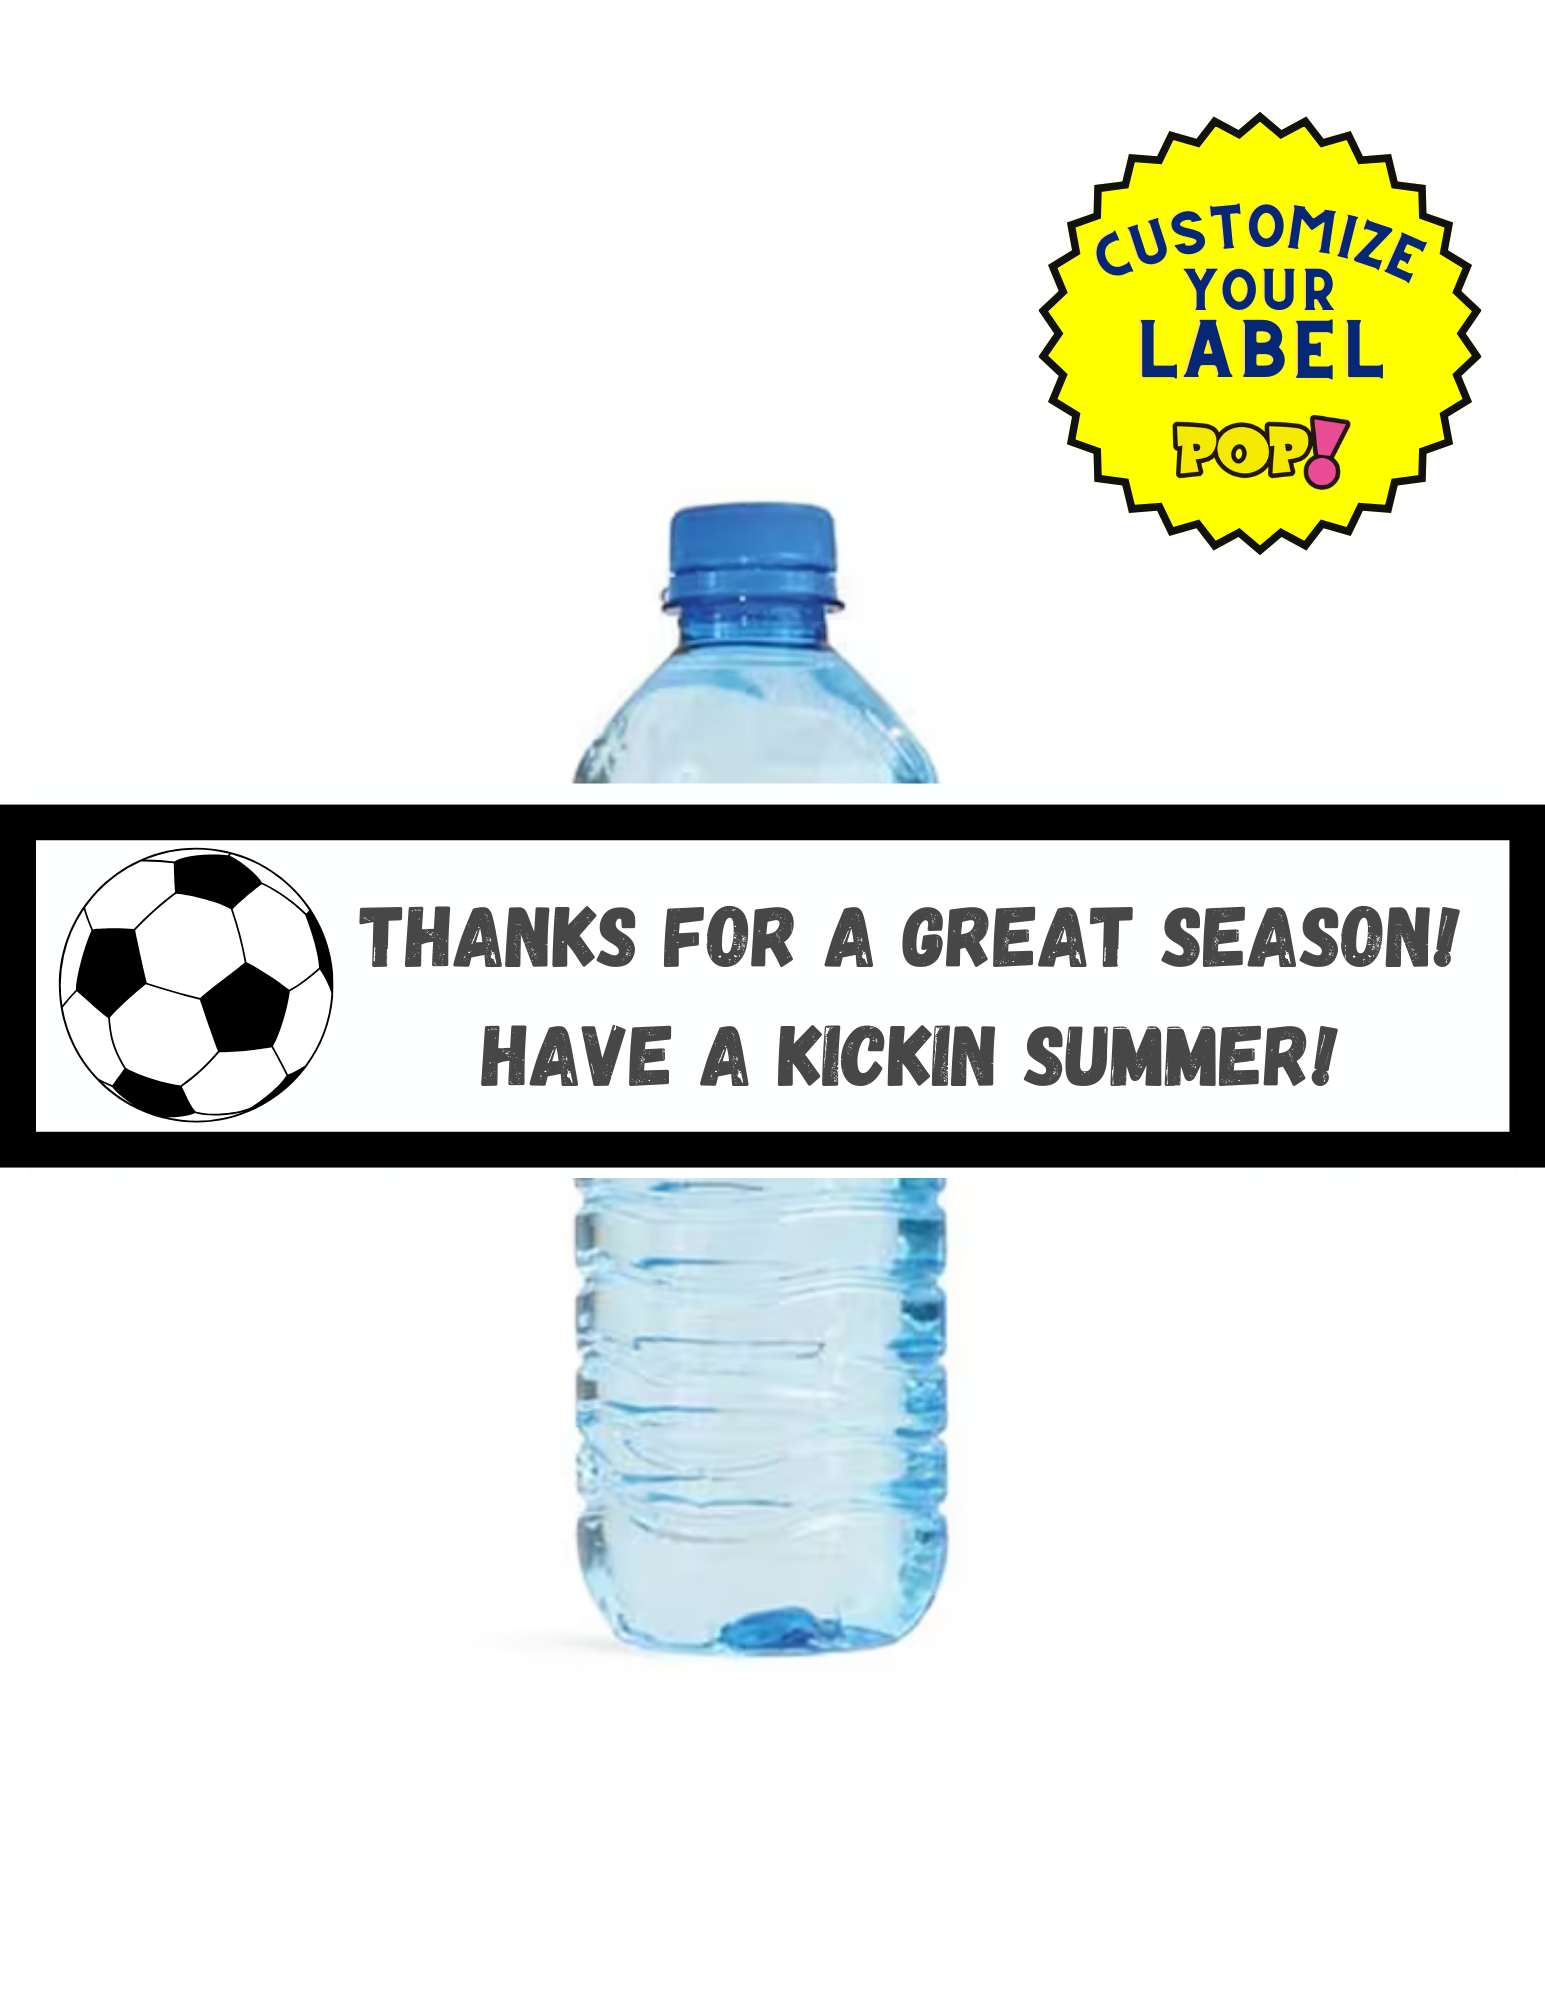 Custom Water Bottle Labels - Send Us Your Image - POPPartyballoons